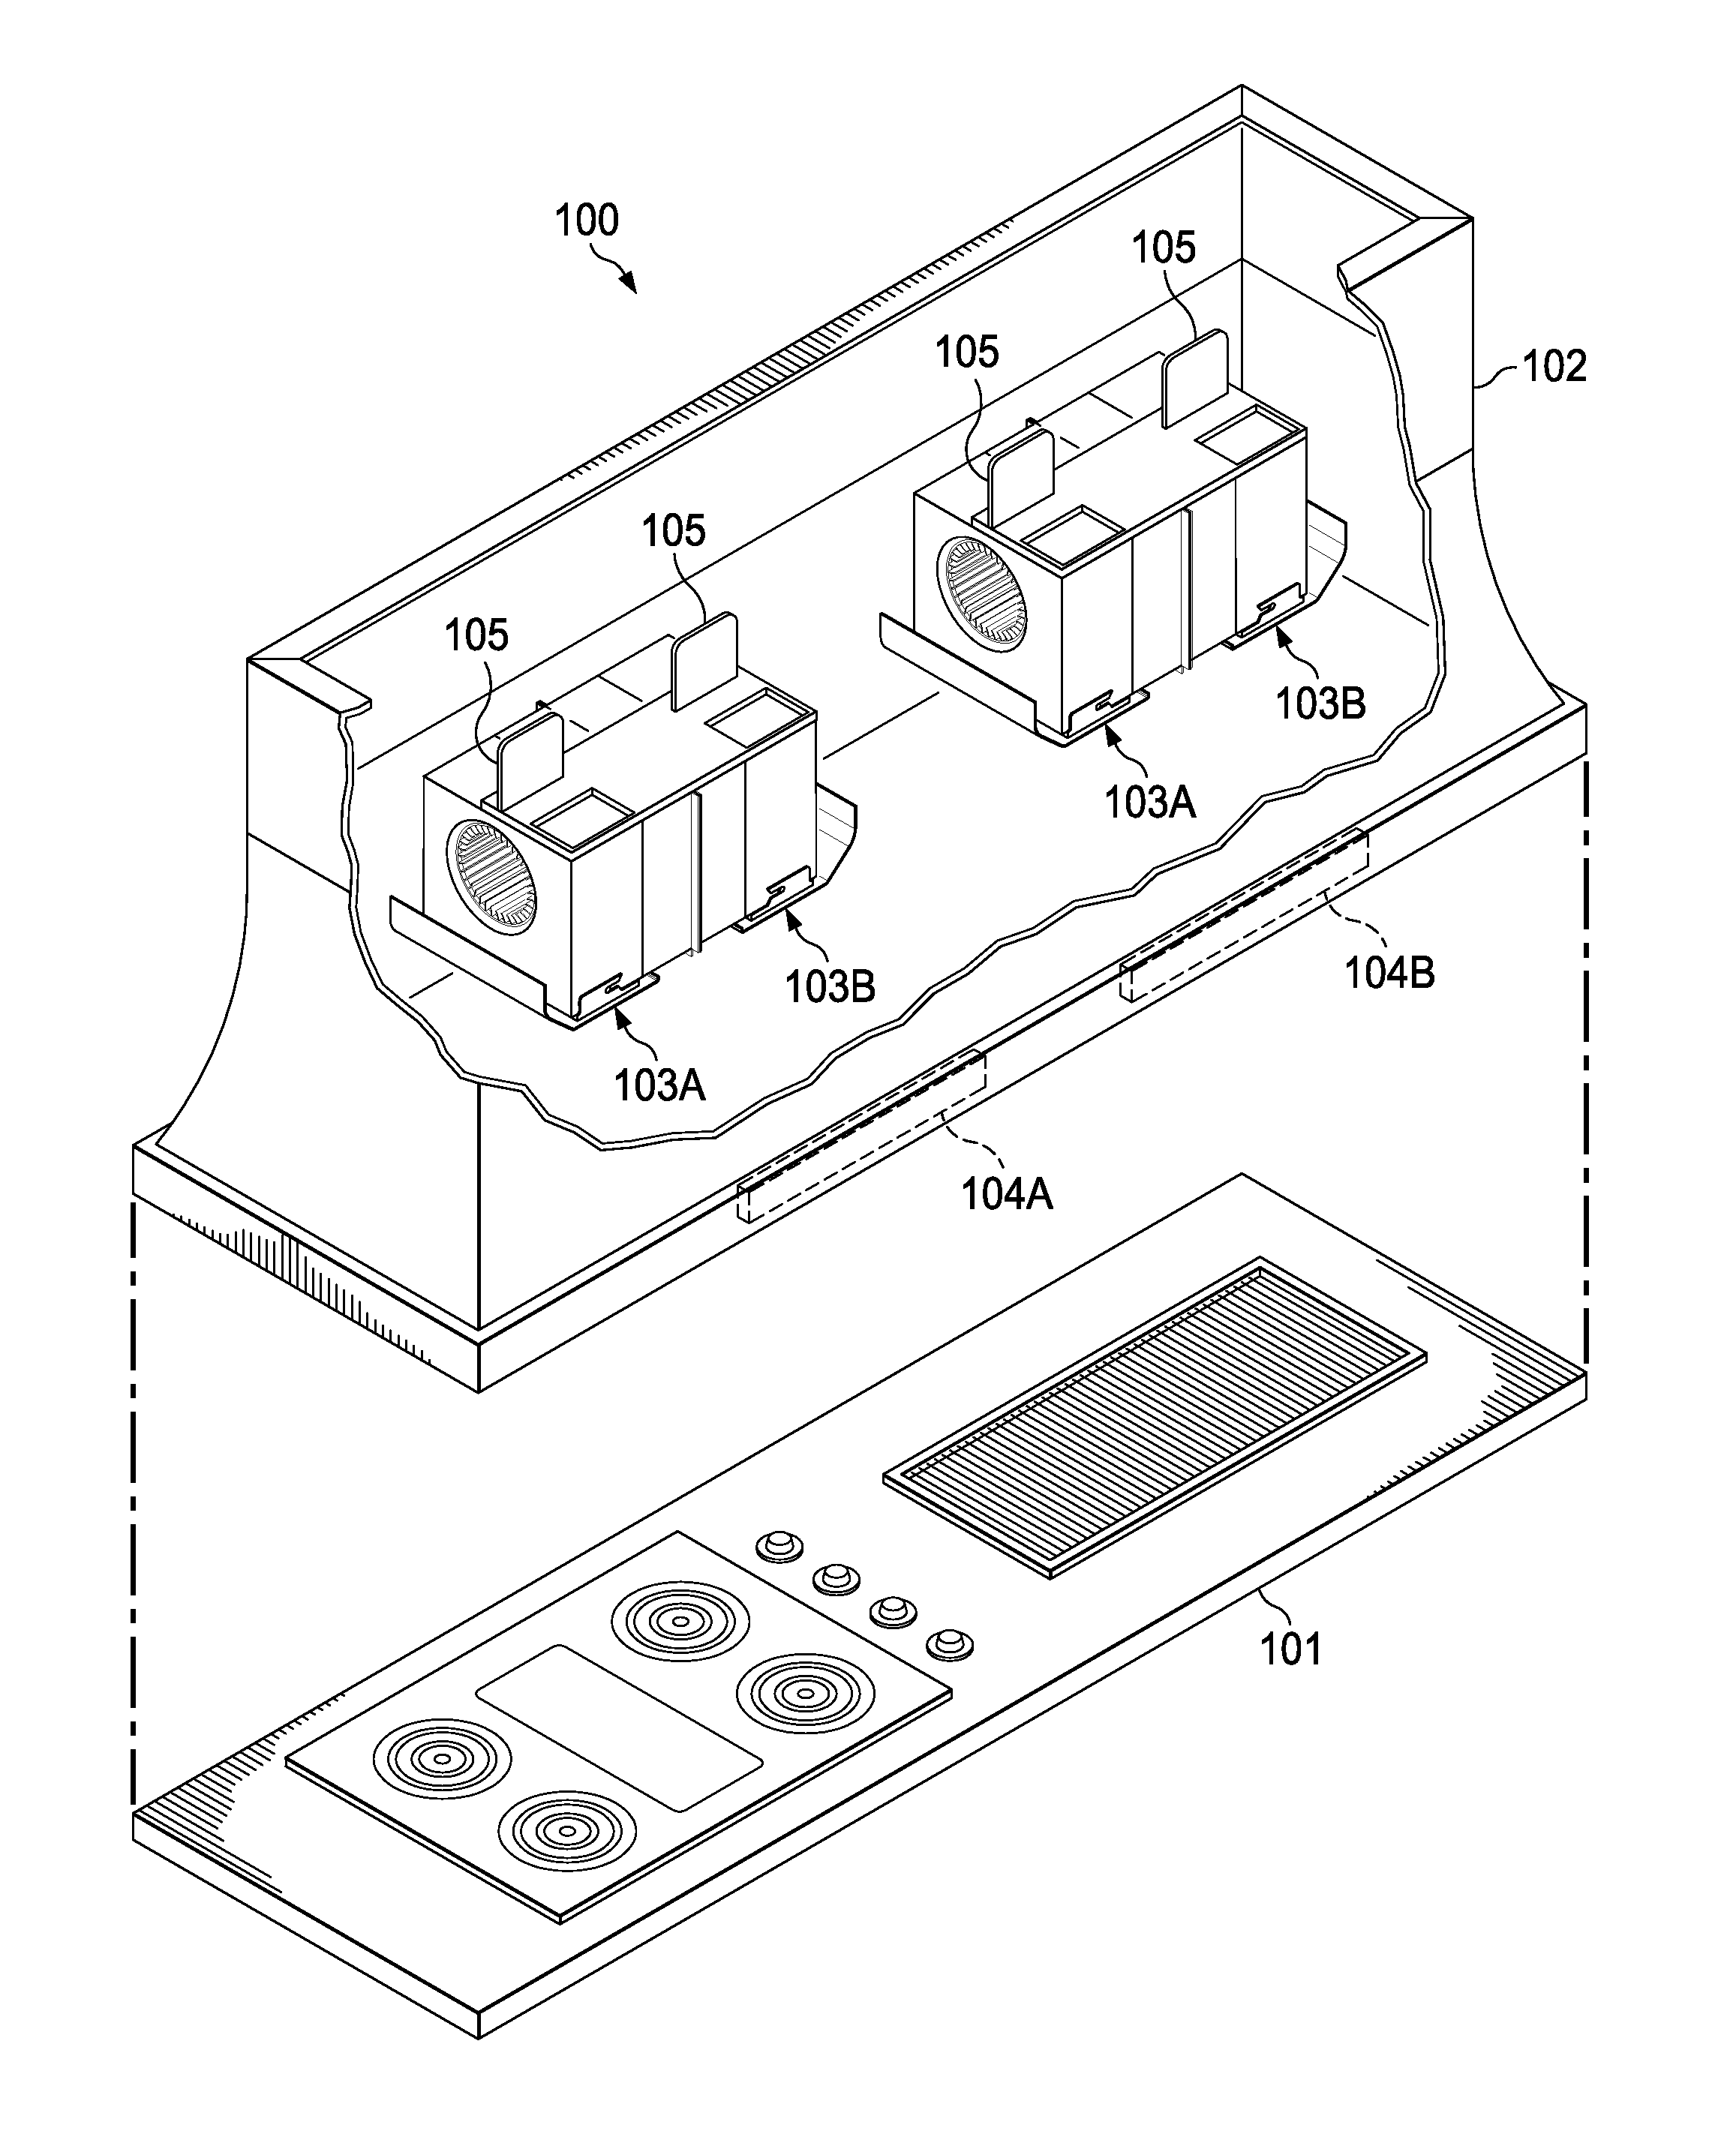 Systems and methods for collecting and removing cooking byproducts in a kitchen ventilation system